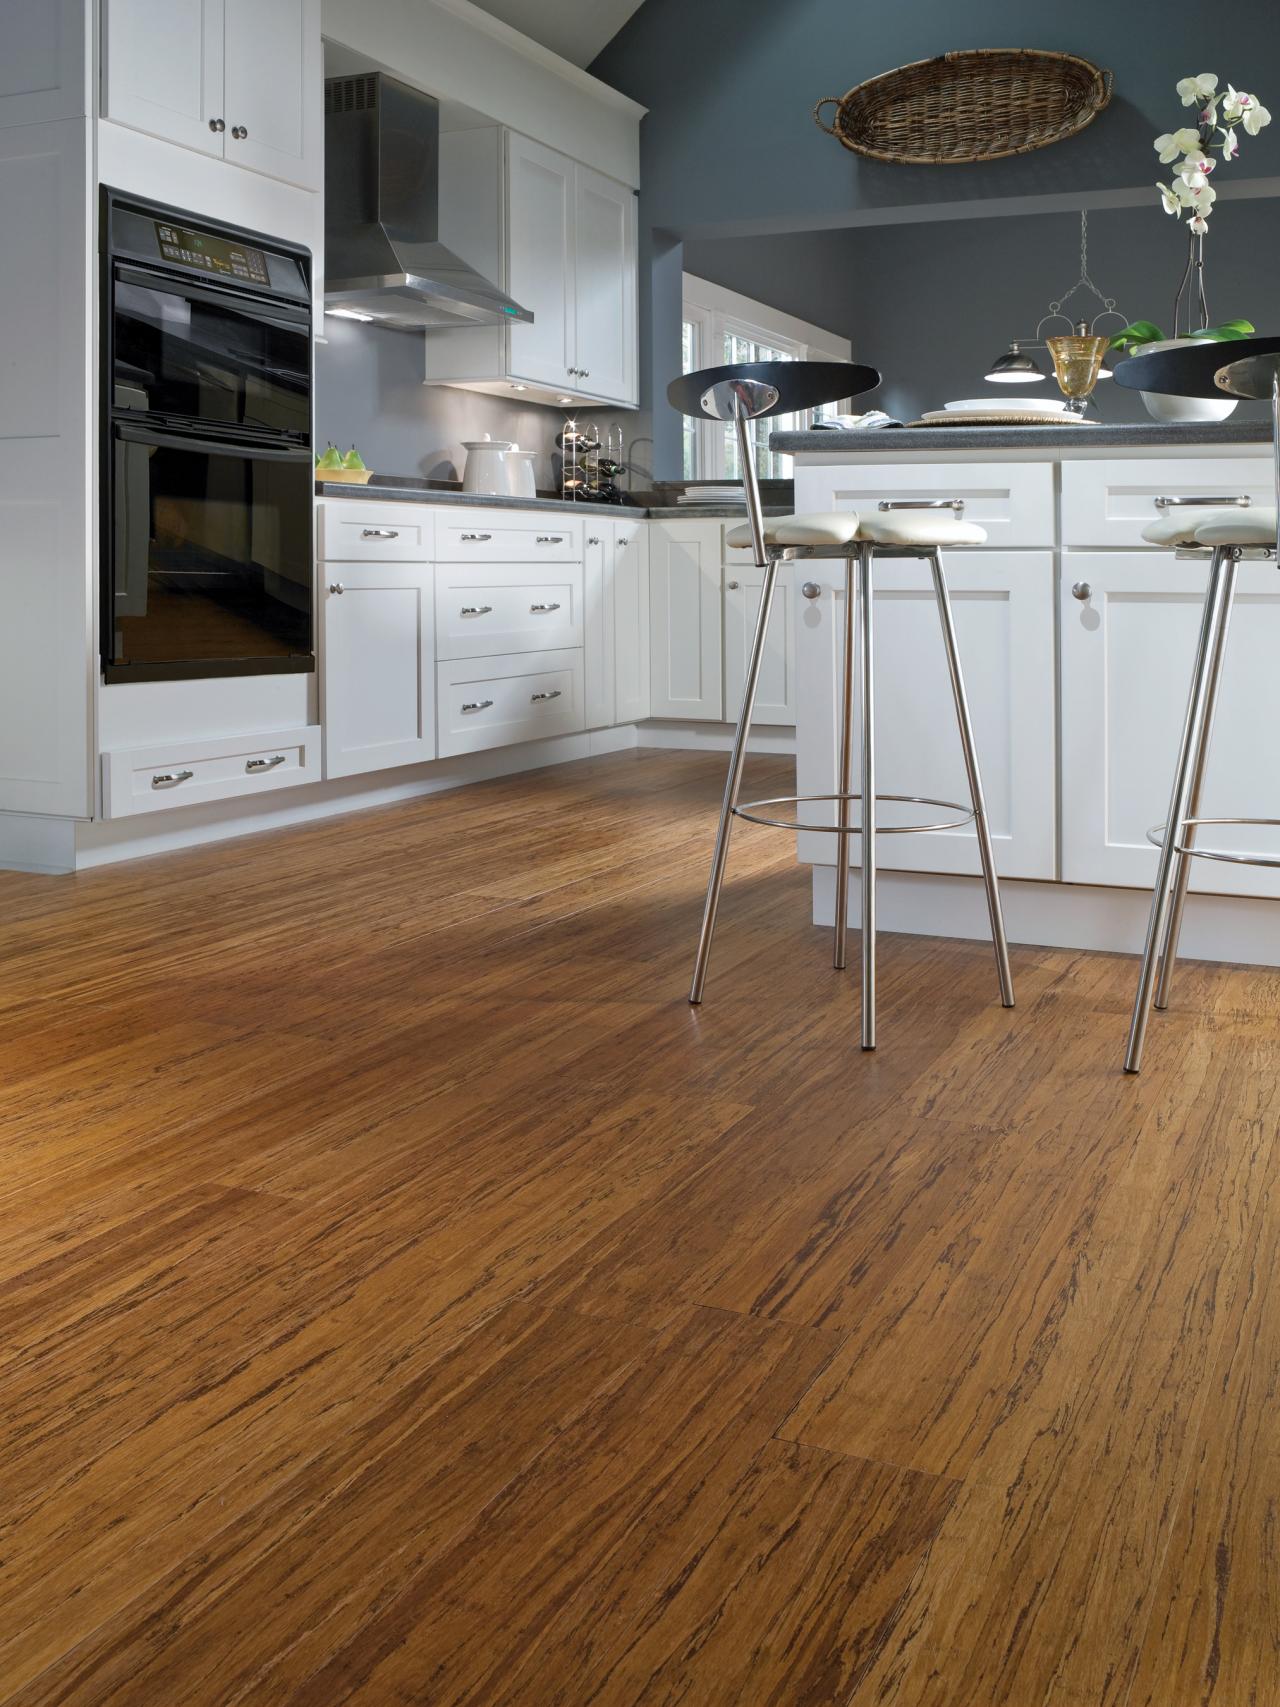 Pros And Cons Of Bamboo Flooring, Cost Of Bamboo Flooring Compared To Hardwood